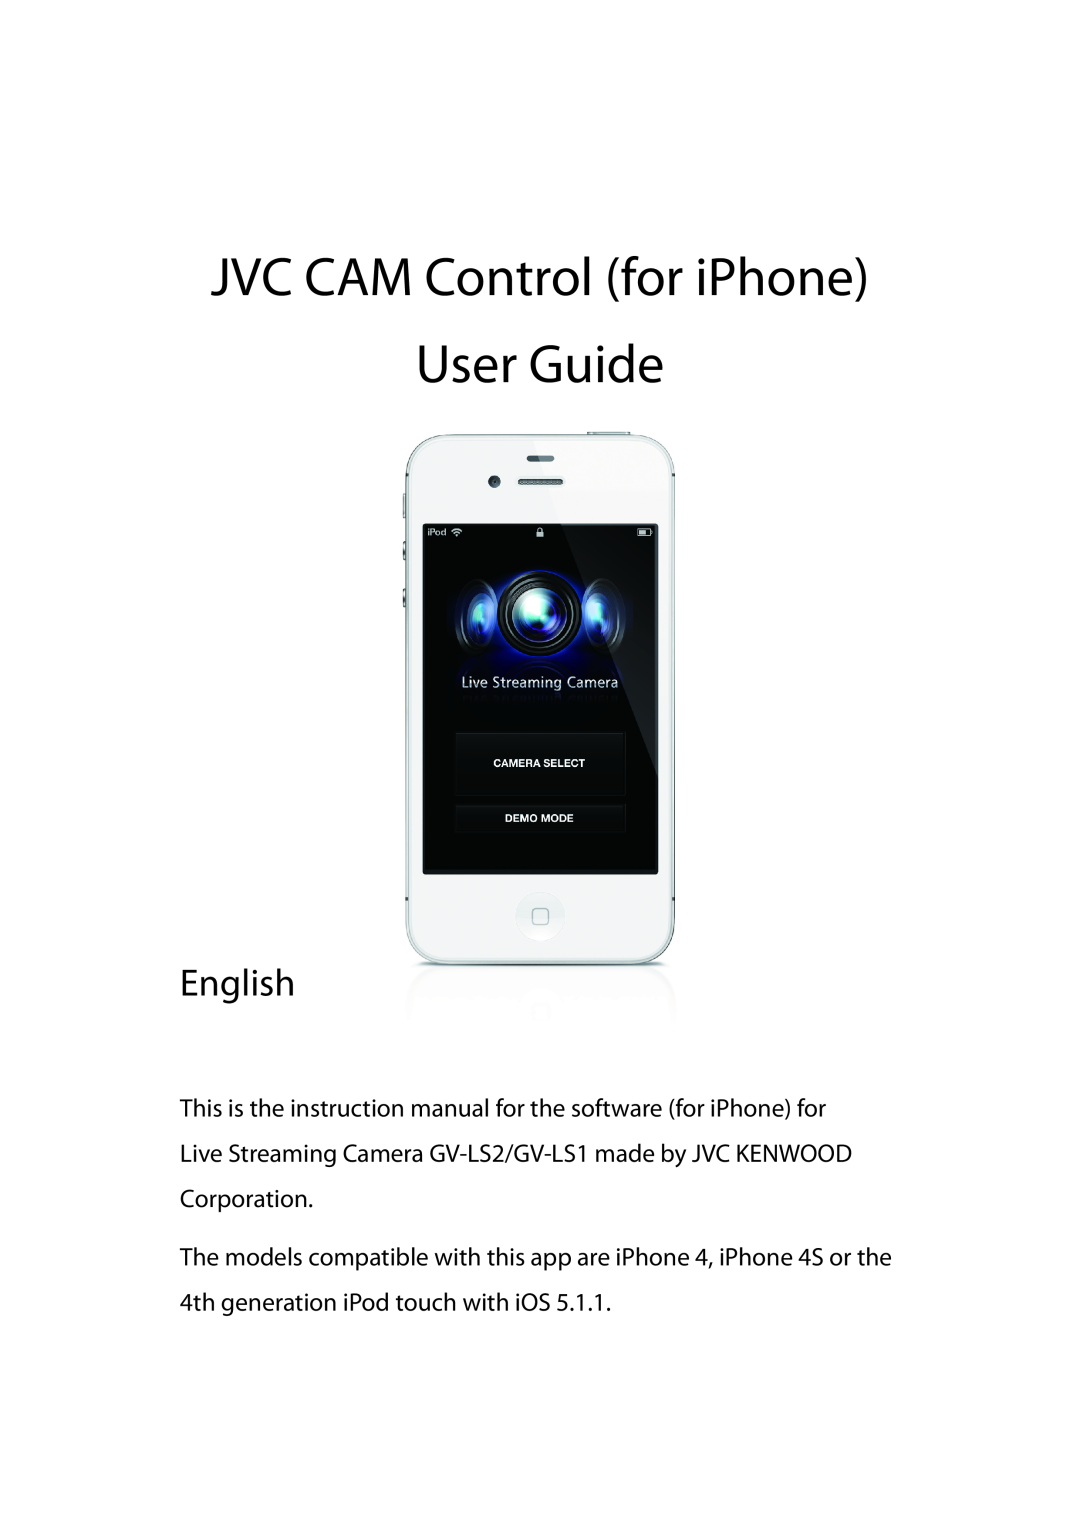 JVC GV-LS2, GV-LS1 instruction manual JVC CAM Control for iPhone User Guide, English 